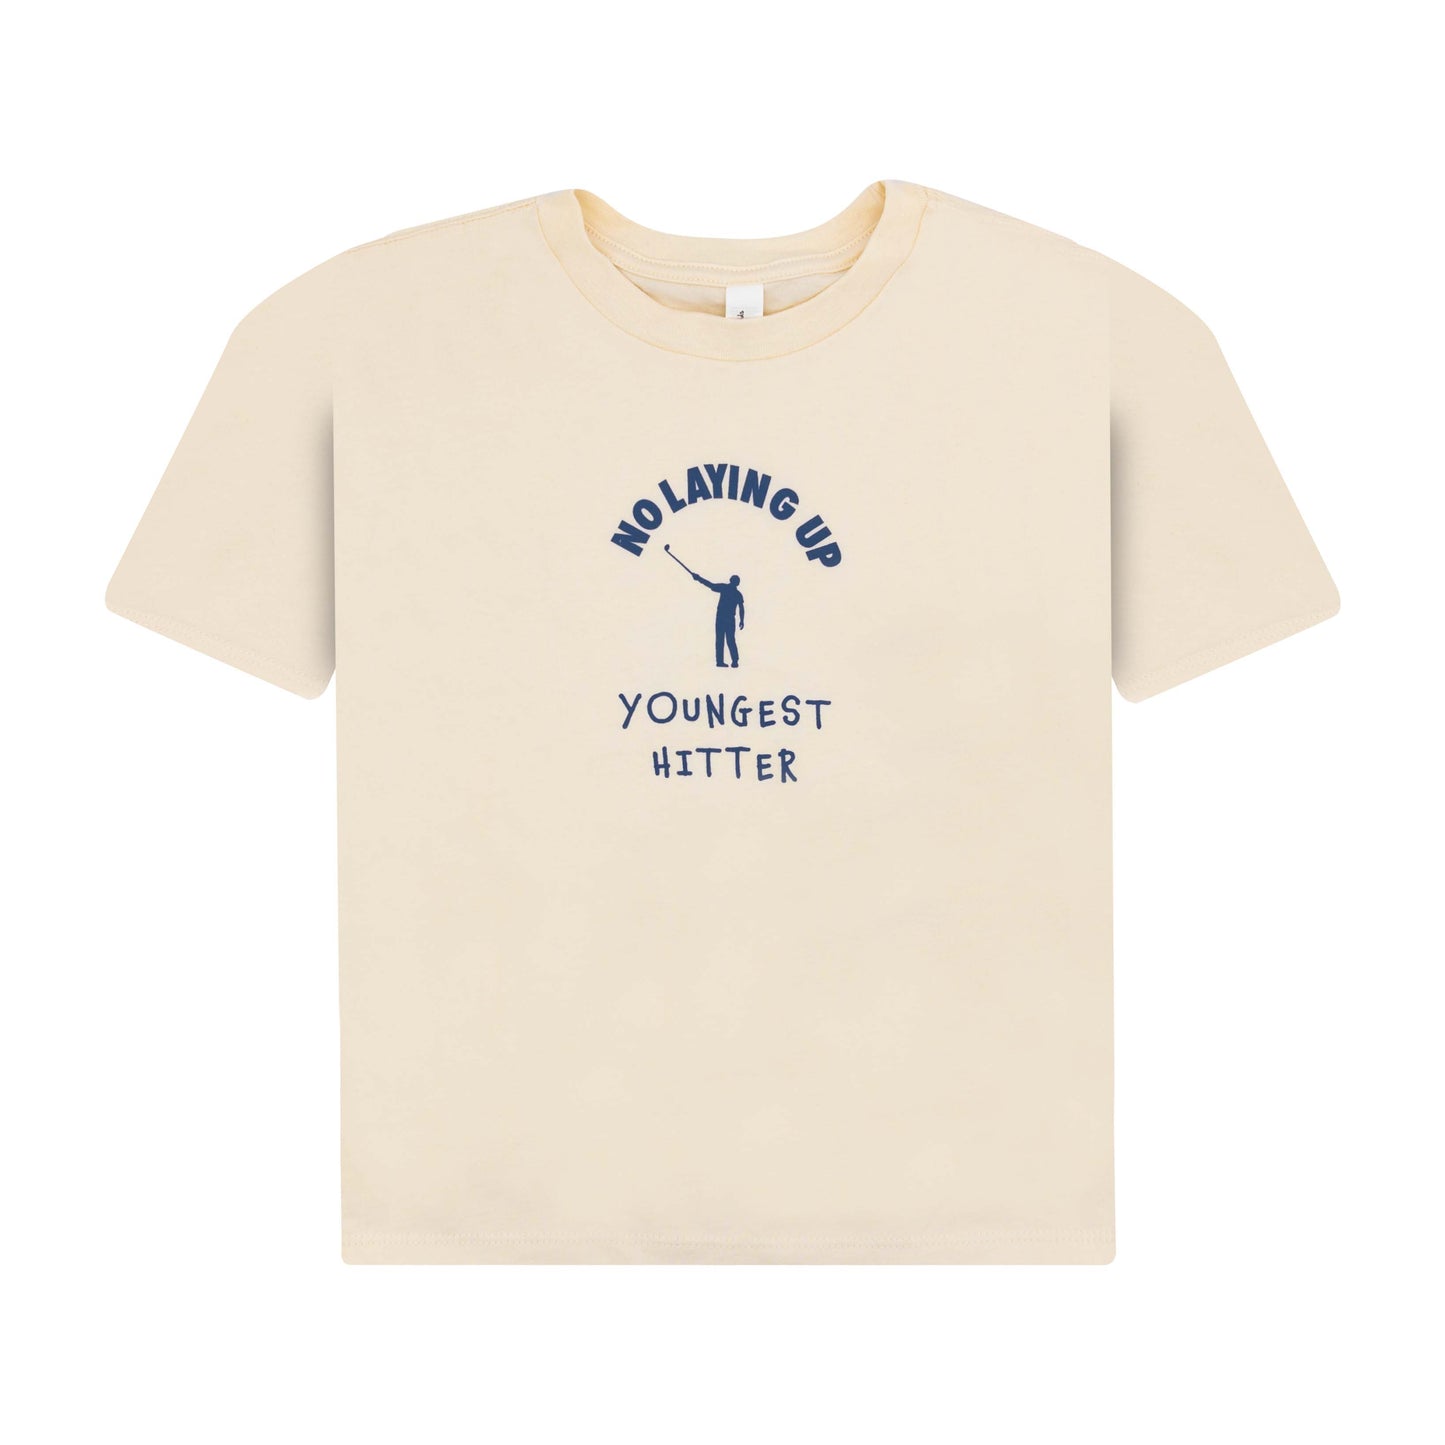 No Laying Up Youngest Hitter Toddler T-Shirt | Natural w/ Navy